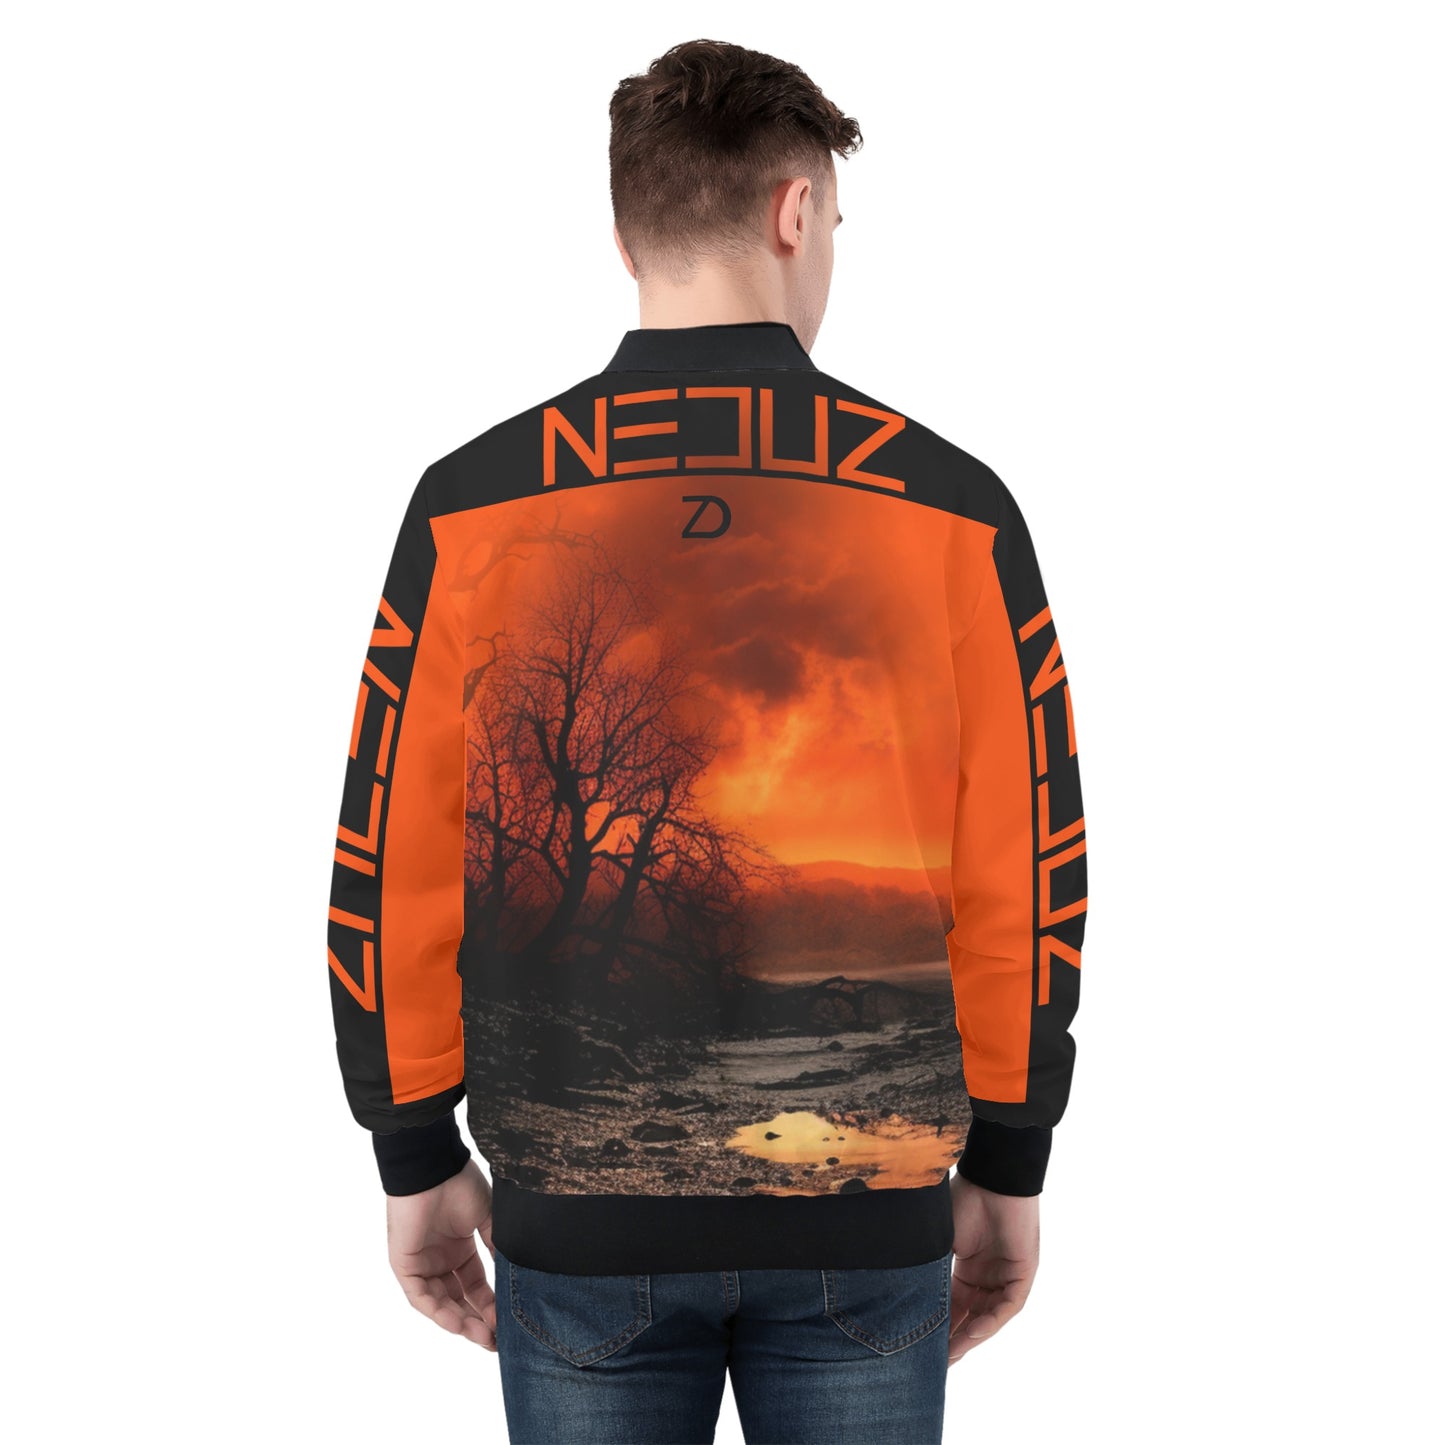 Neduz Mens Crimson Sun Zip Up Bomber Jacket: Show Off Your Style and Stay Warm with Our Unique and High-Quality Design